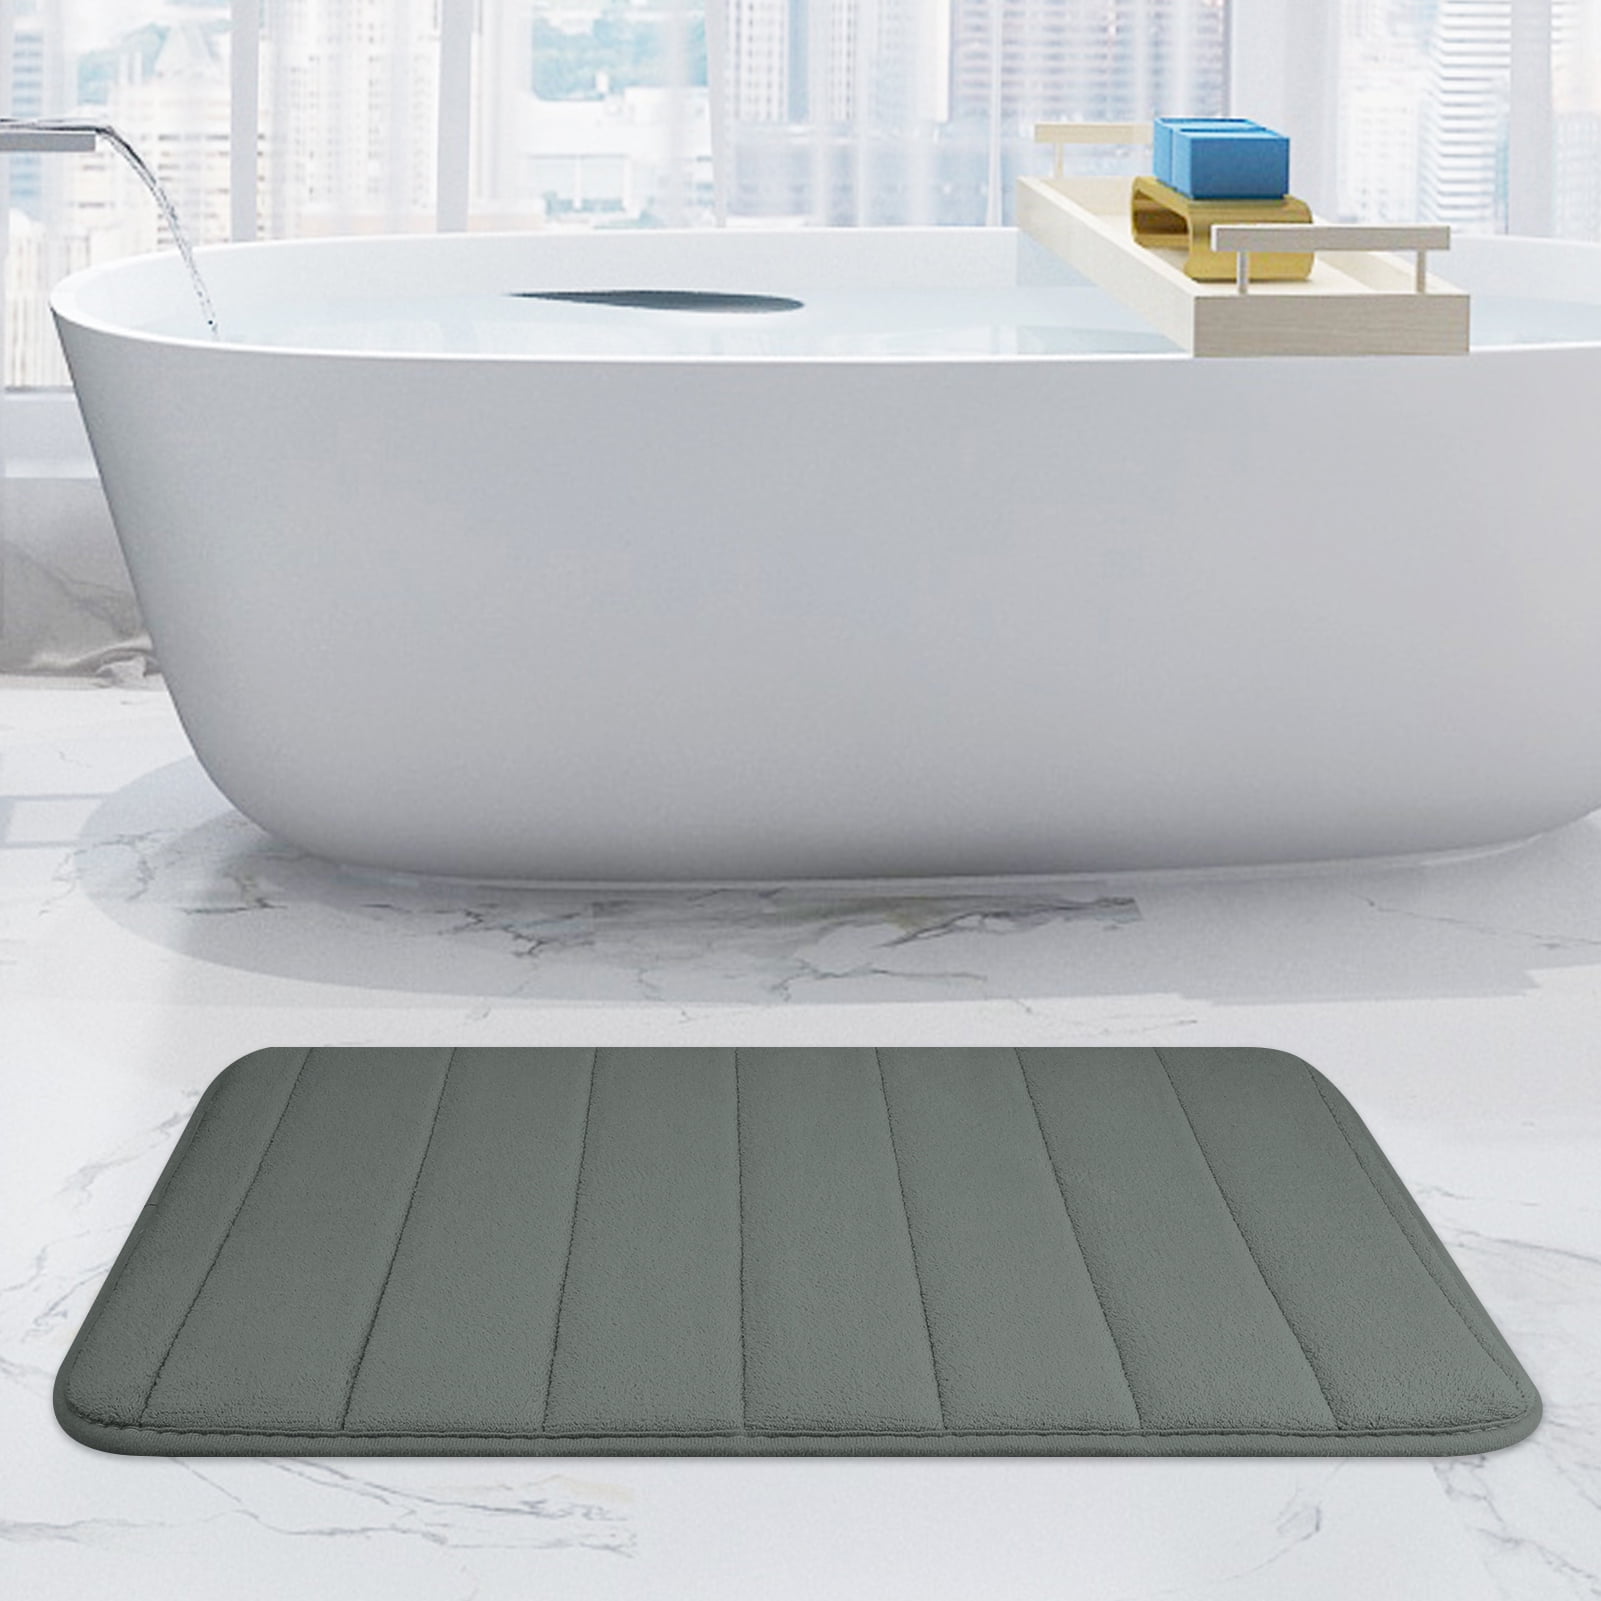 ▷ Water absorbent carpet pad for the bath » Murzl